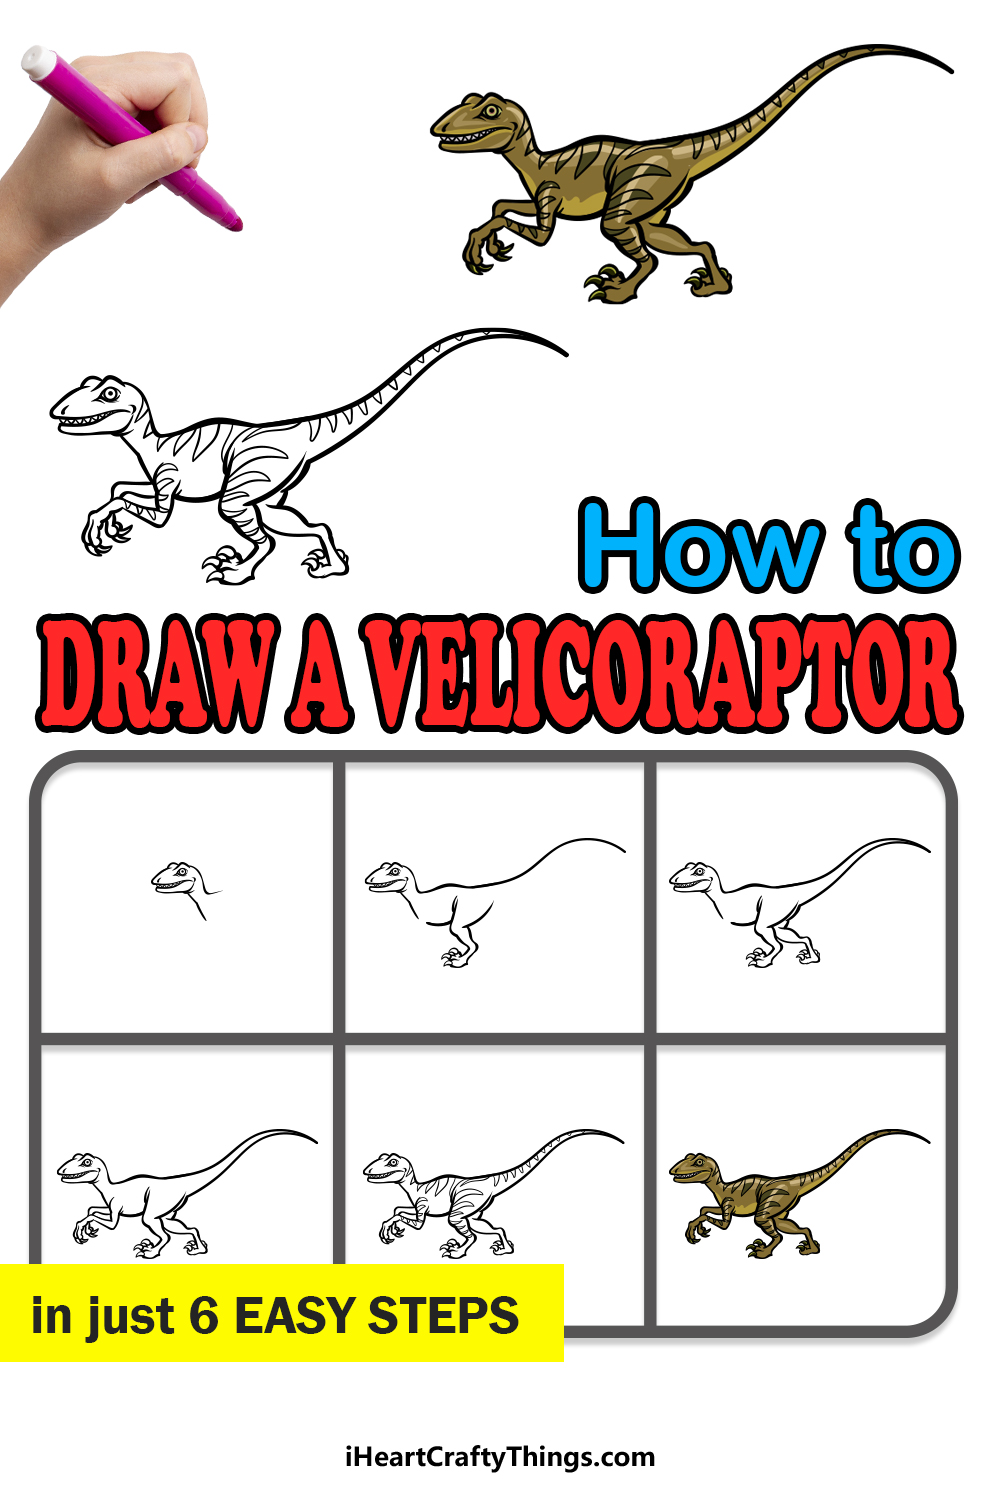 how to draw a Velociraptor in 6 easy steps